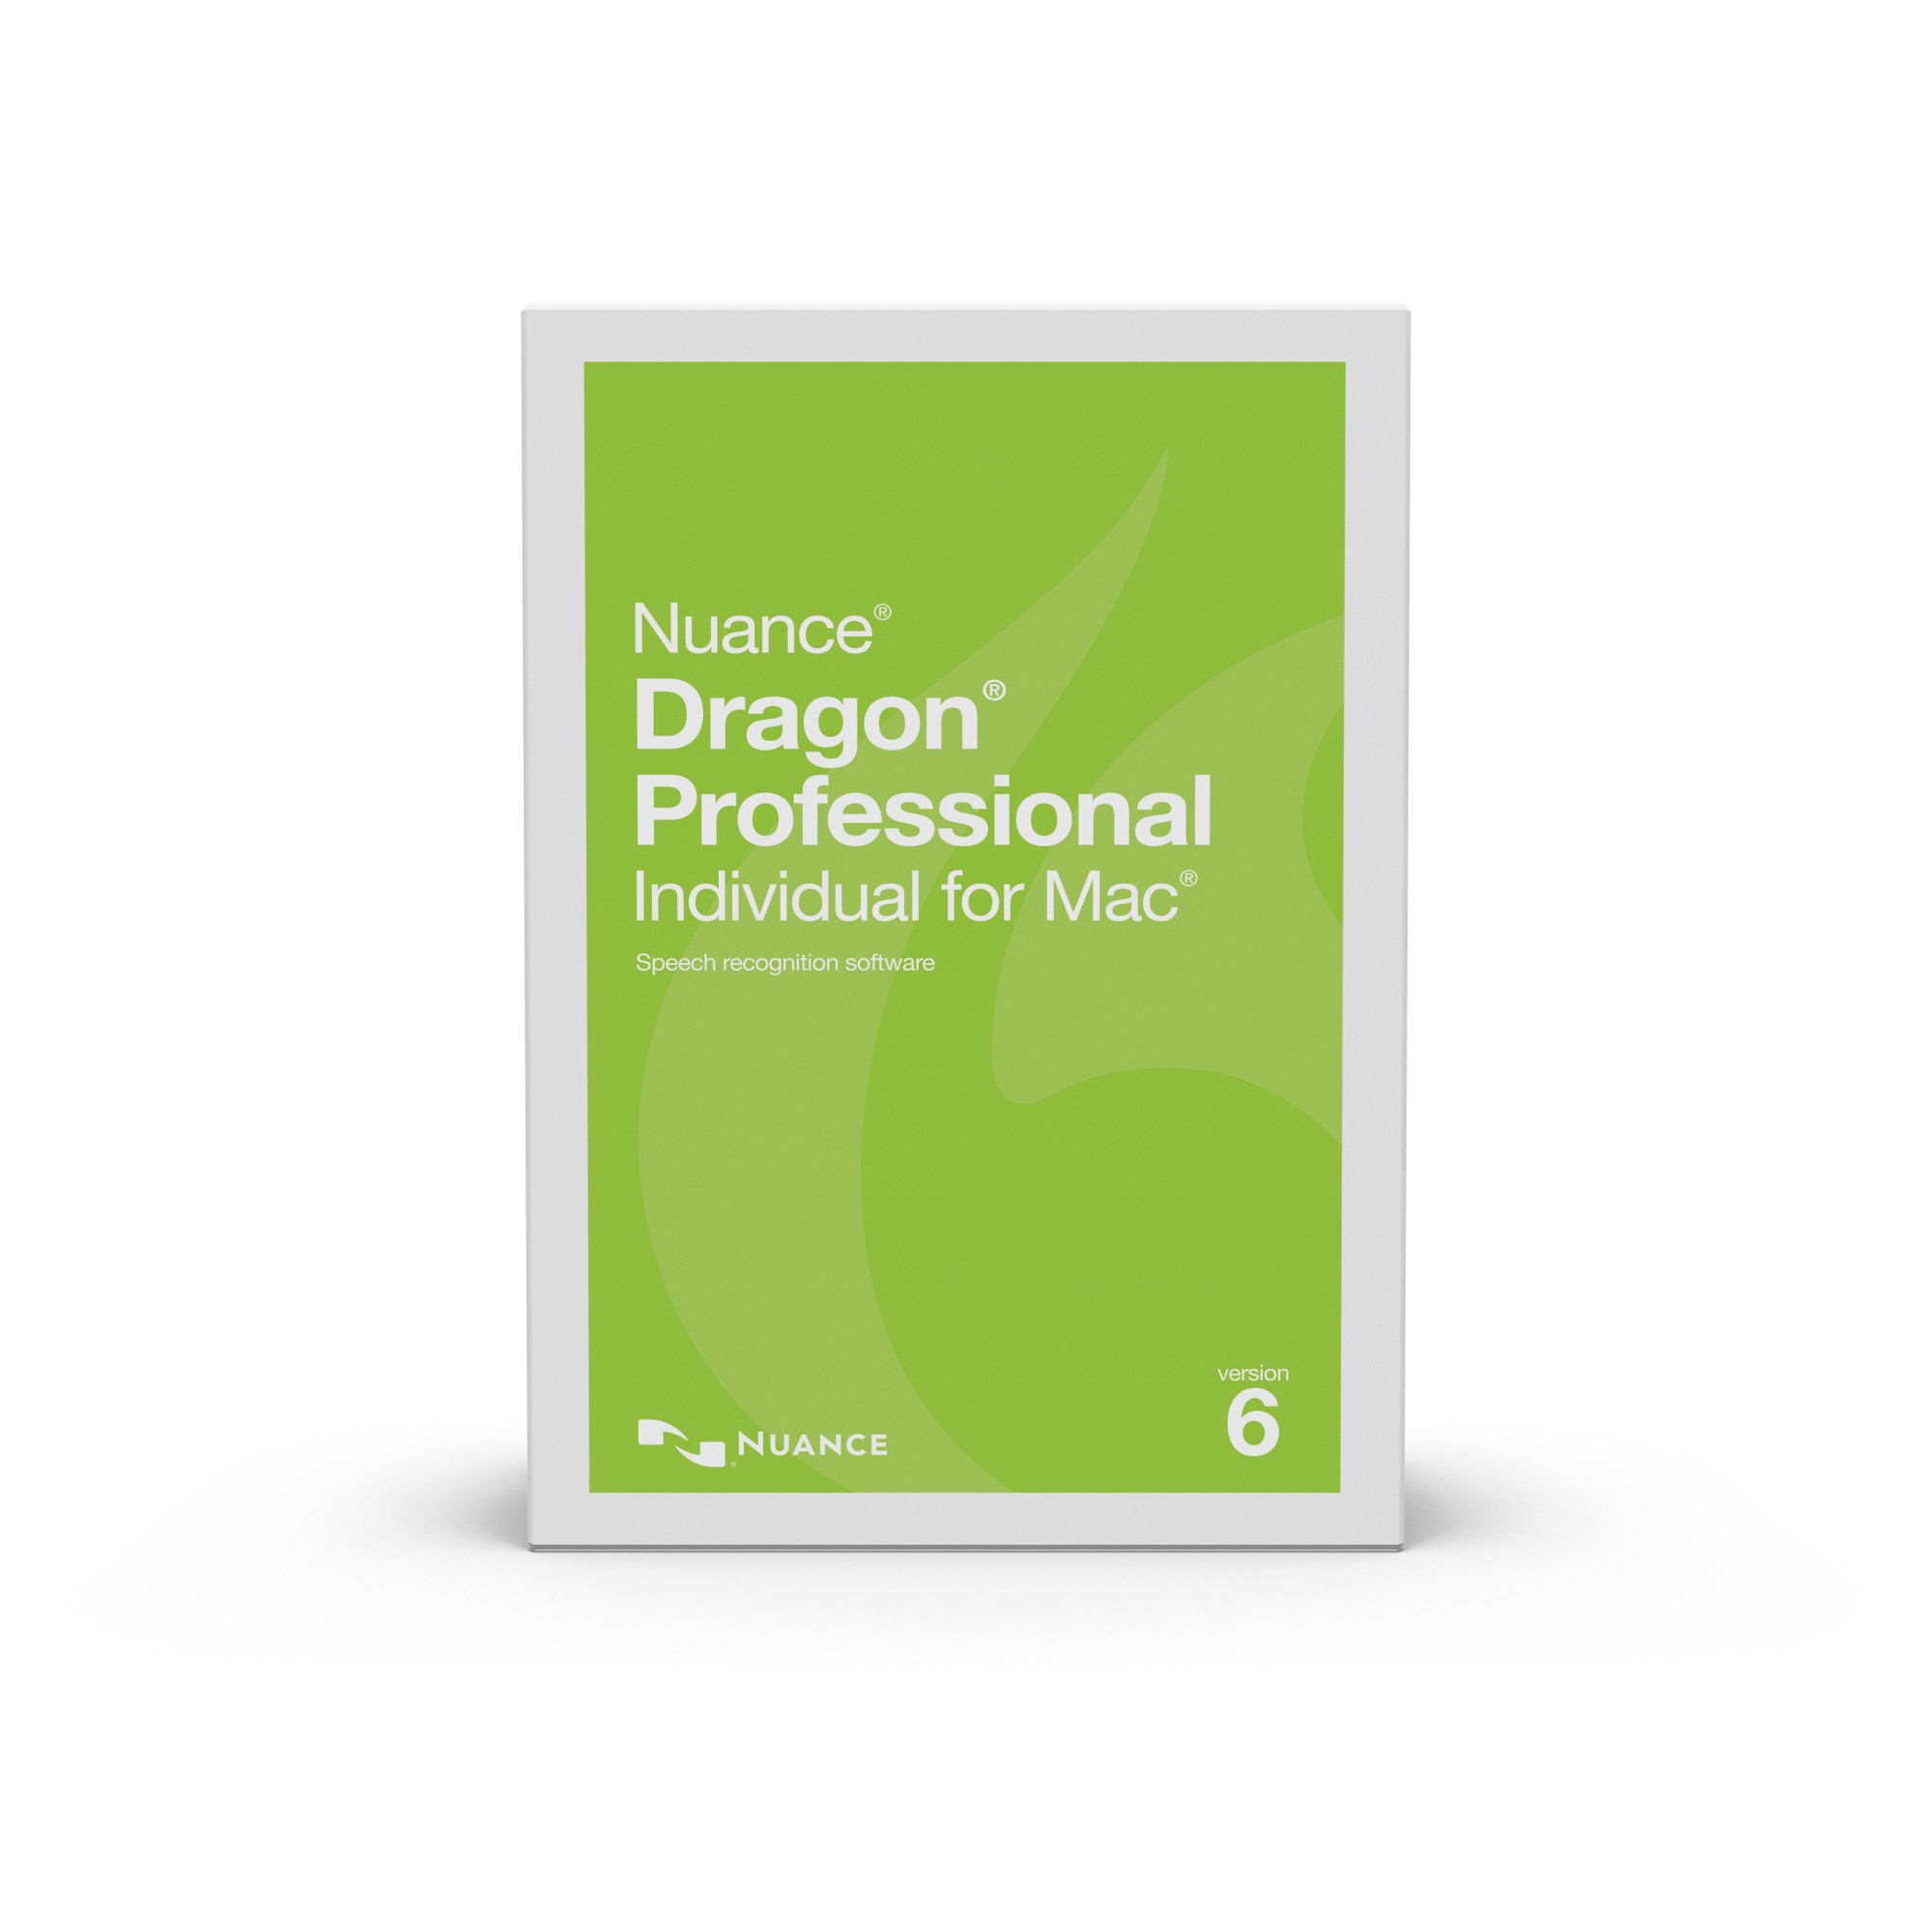 who sells nuance dragon software